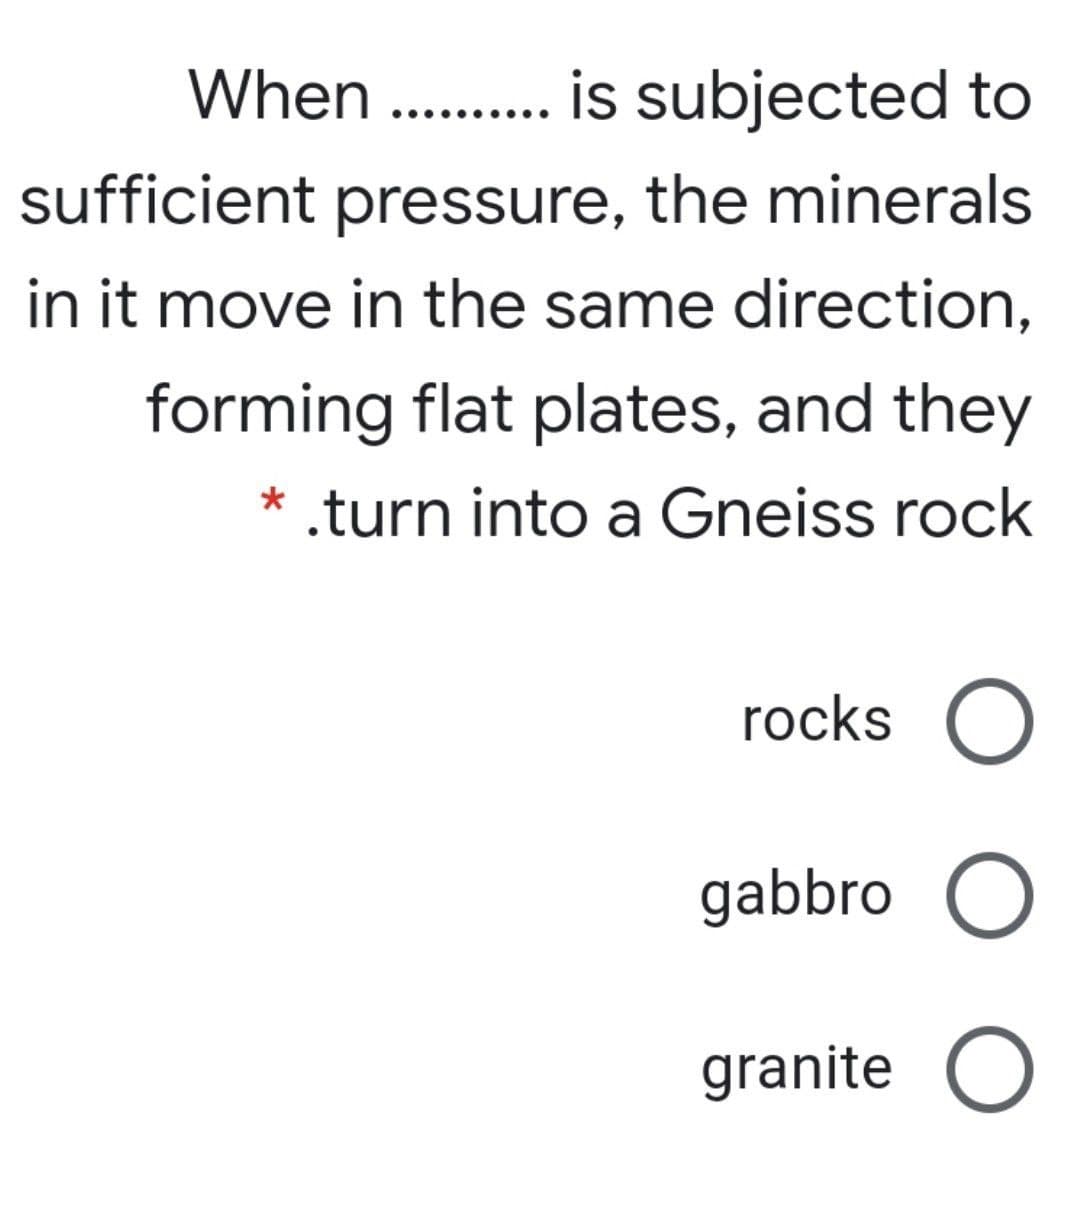 When . is subjected to
sufficient pressure, the minerals
in it move in the same direction,
forming flat plates, and they
* .turn into a Gneiss rock
rocks O
gabbro O
granite O
